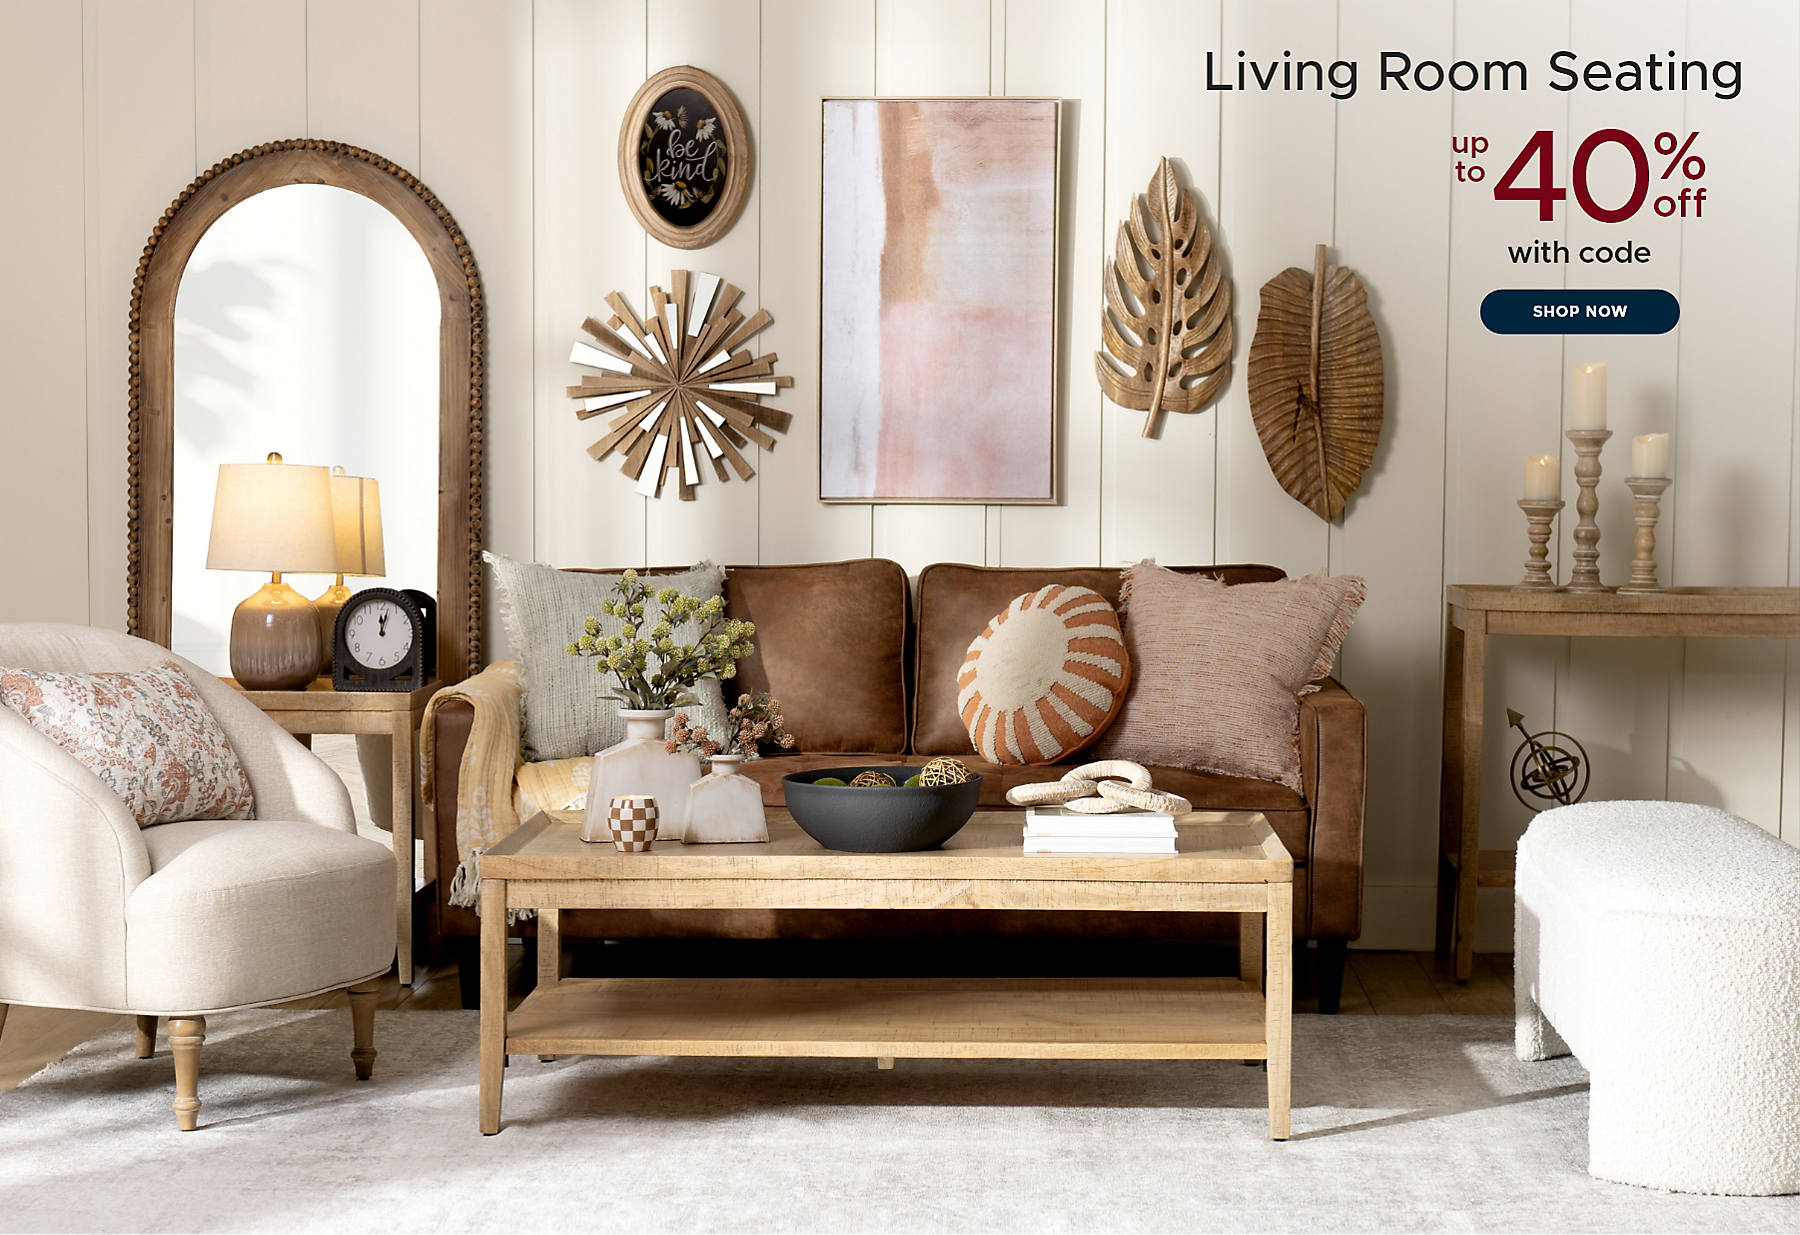 Living Room Seating up to 40% off with code shop now